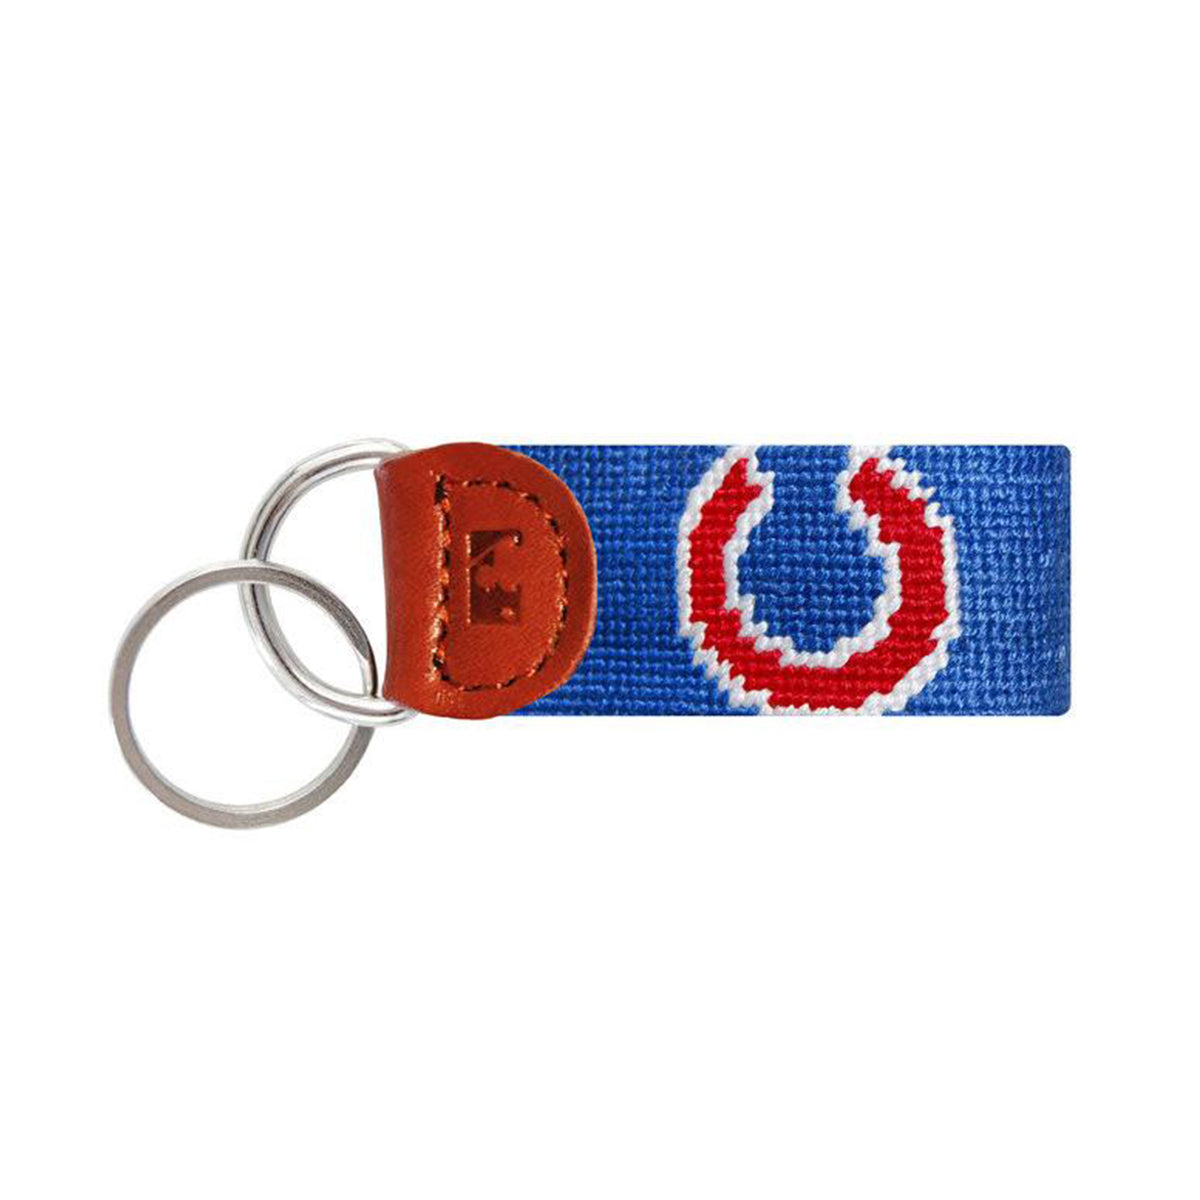 Chicago Cubs Key Fob - All She Wrote